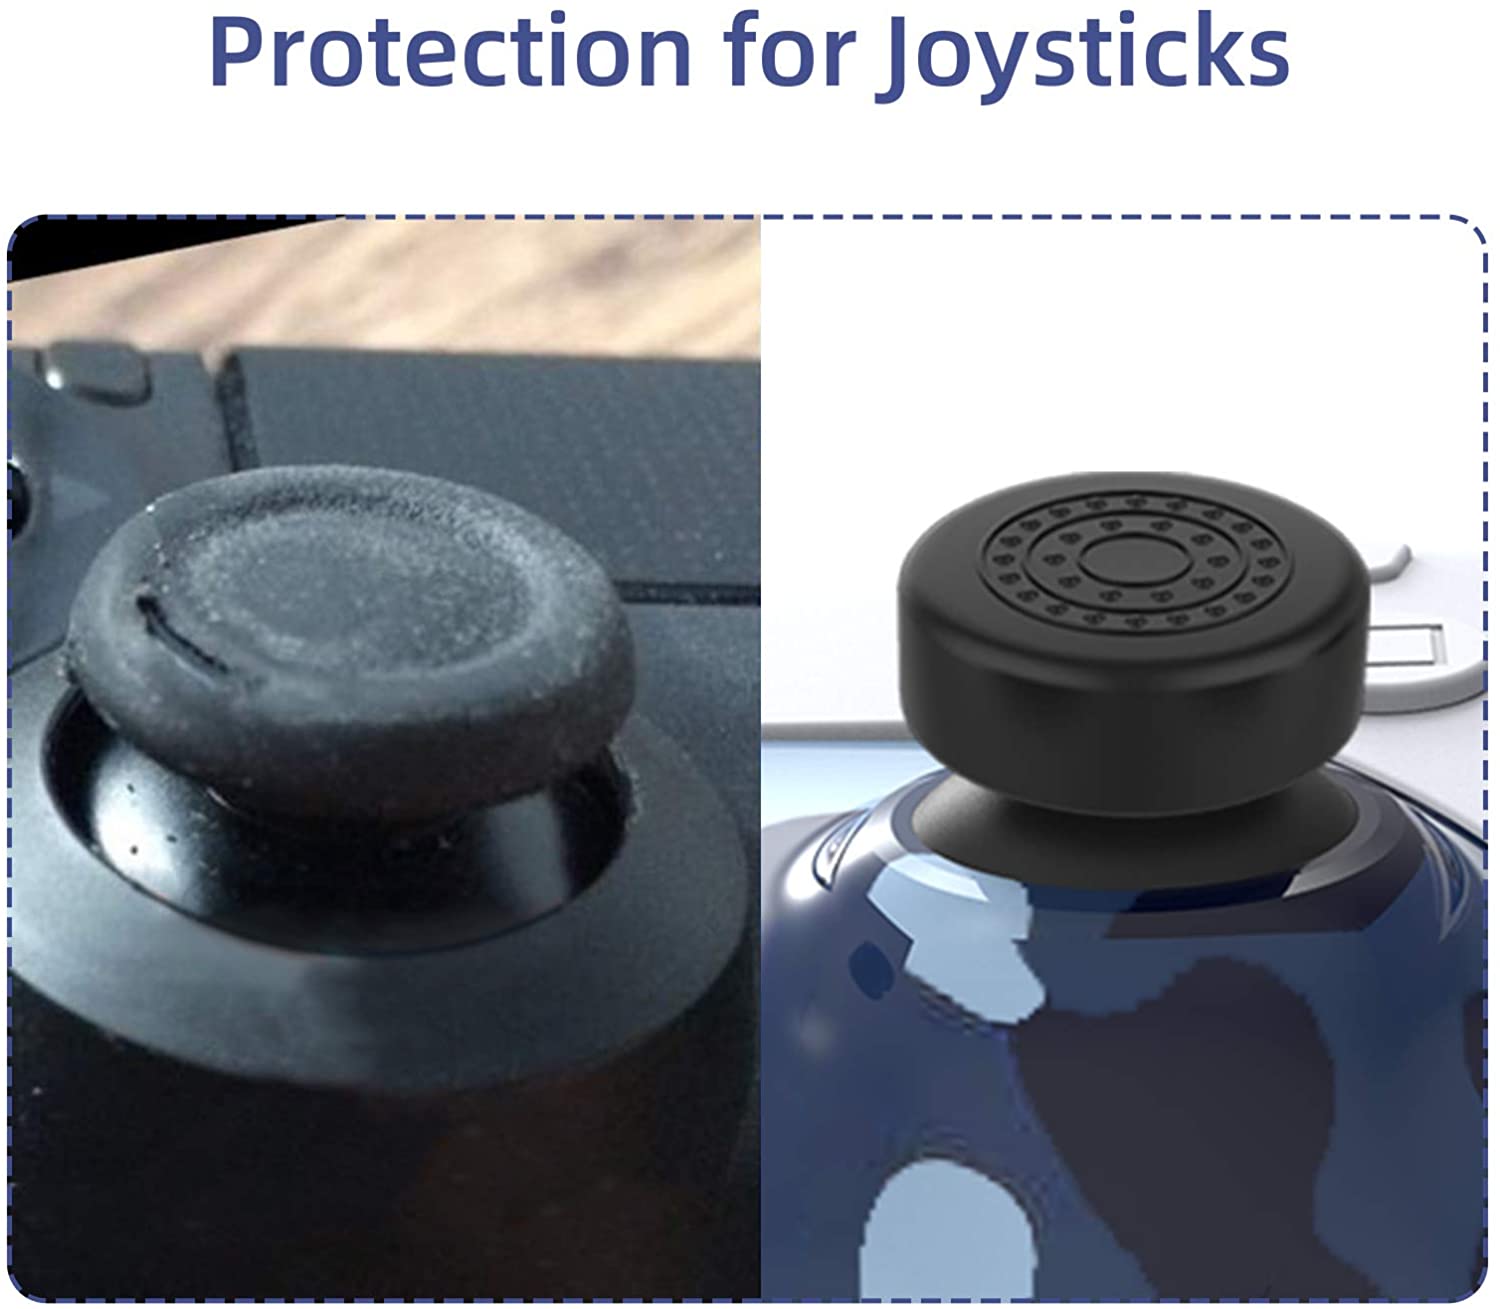 The included joystick caps can protect the original PS5 controller joystick.